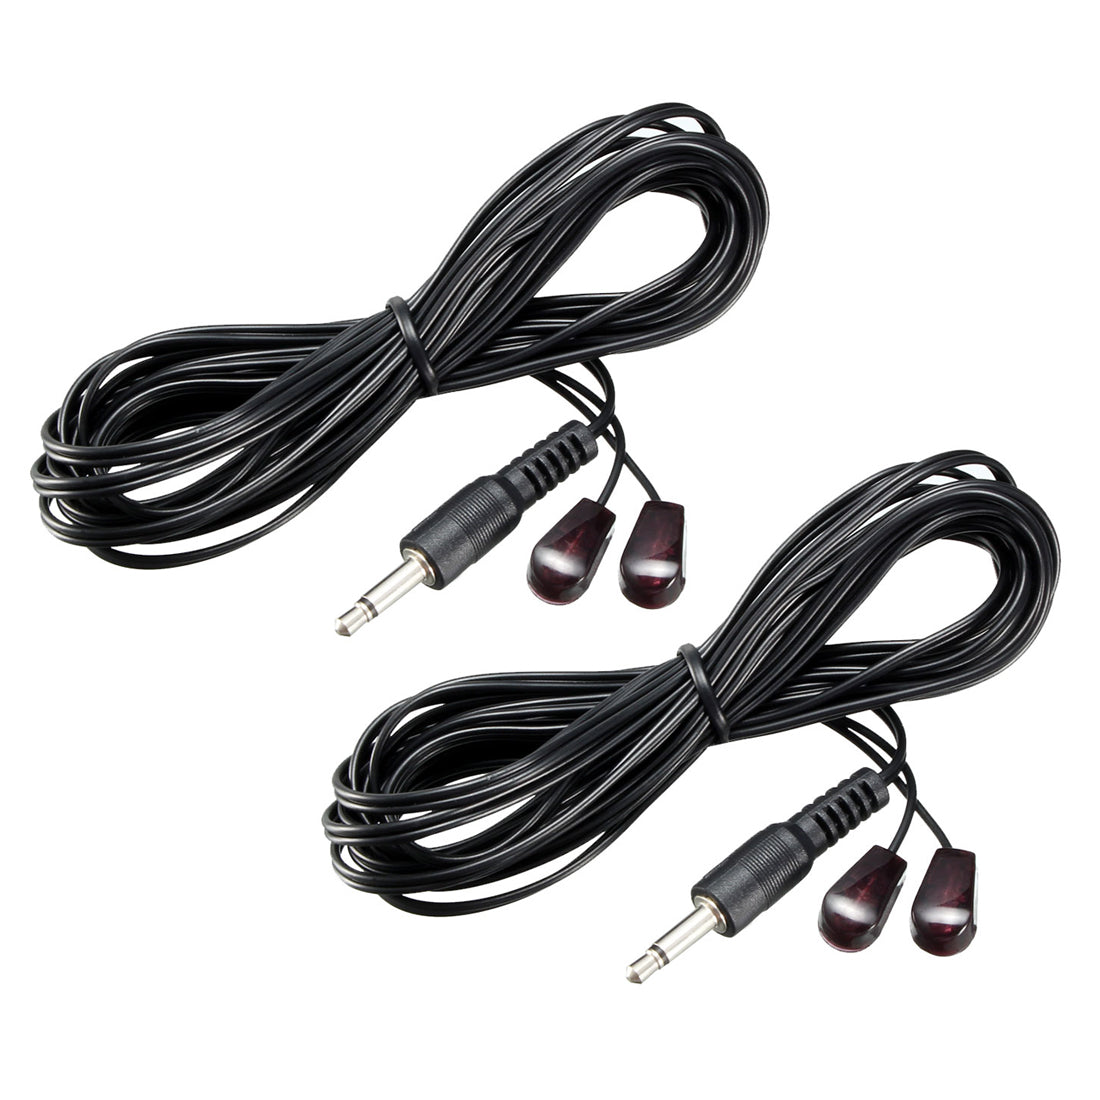 uxcell Uxcell IR Infrared Emitter Cable 3meters Long 45 Degree Emission Angle 3.5mm Jack 2pcs